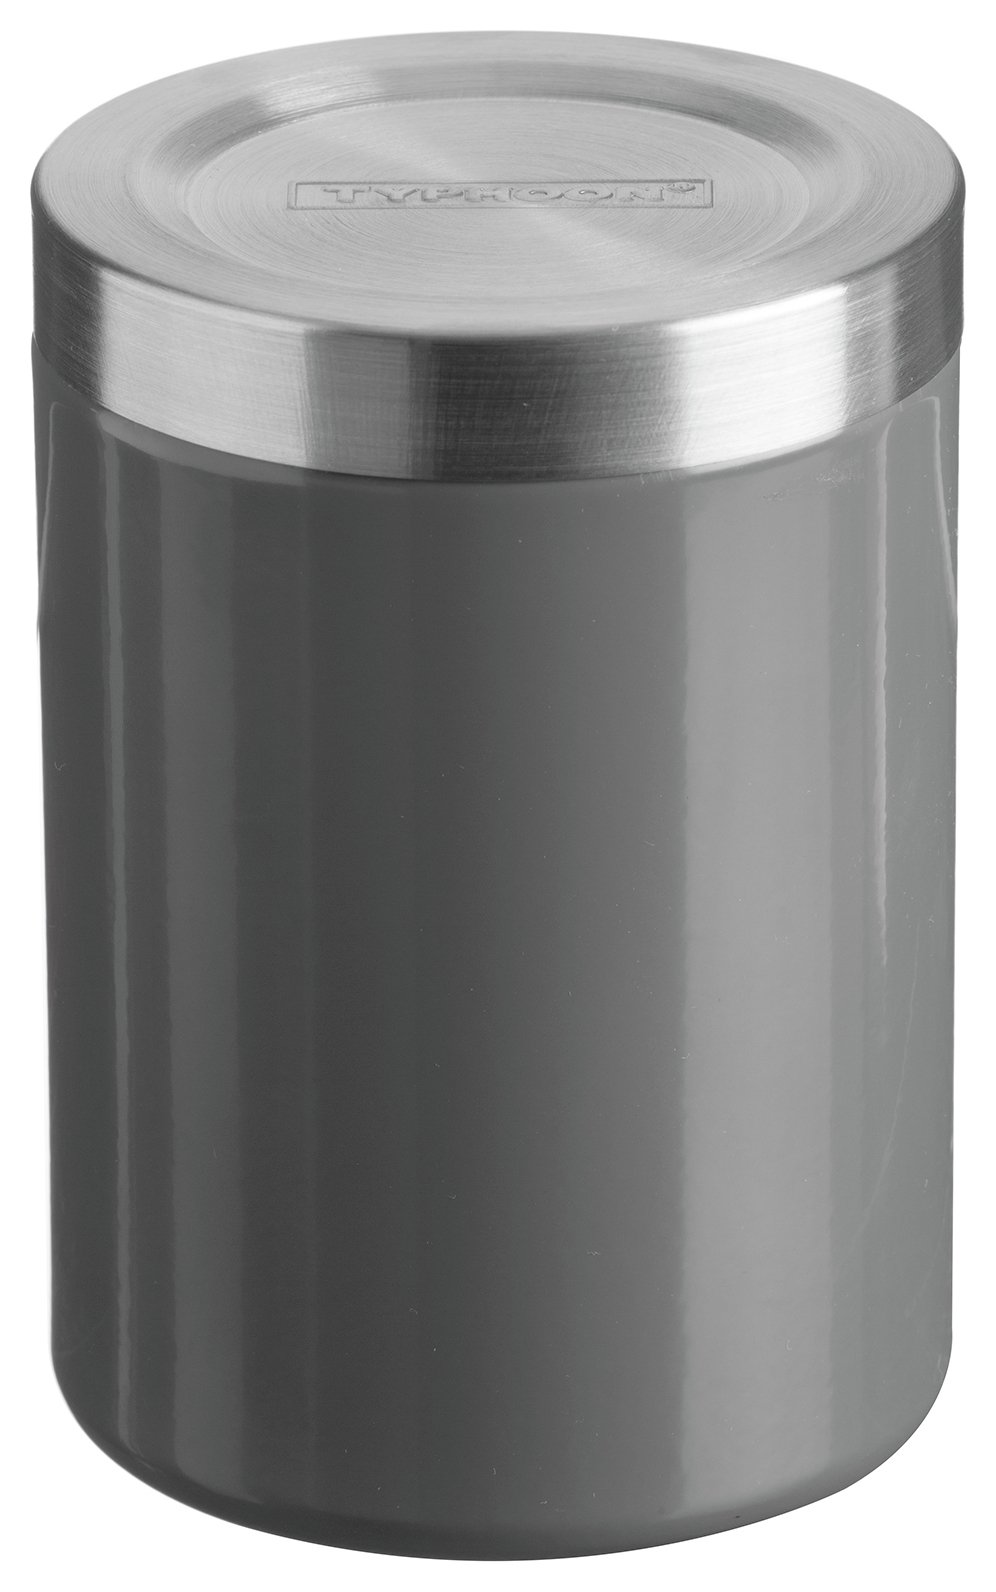 Typhoon Hudson 15cm Stacking Storage Canister - Grey